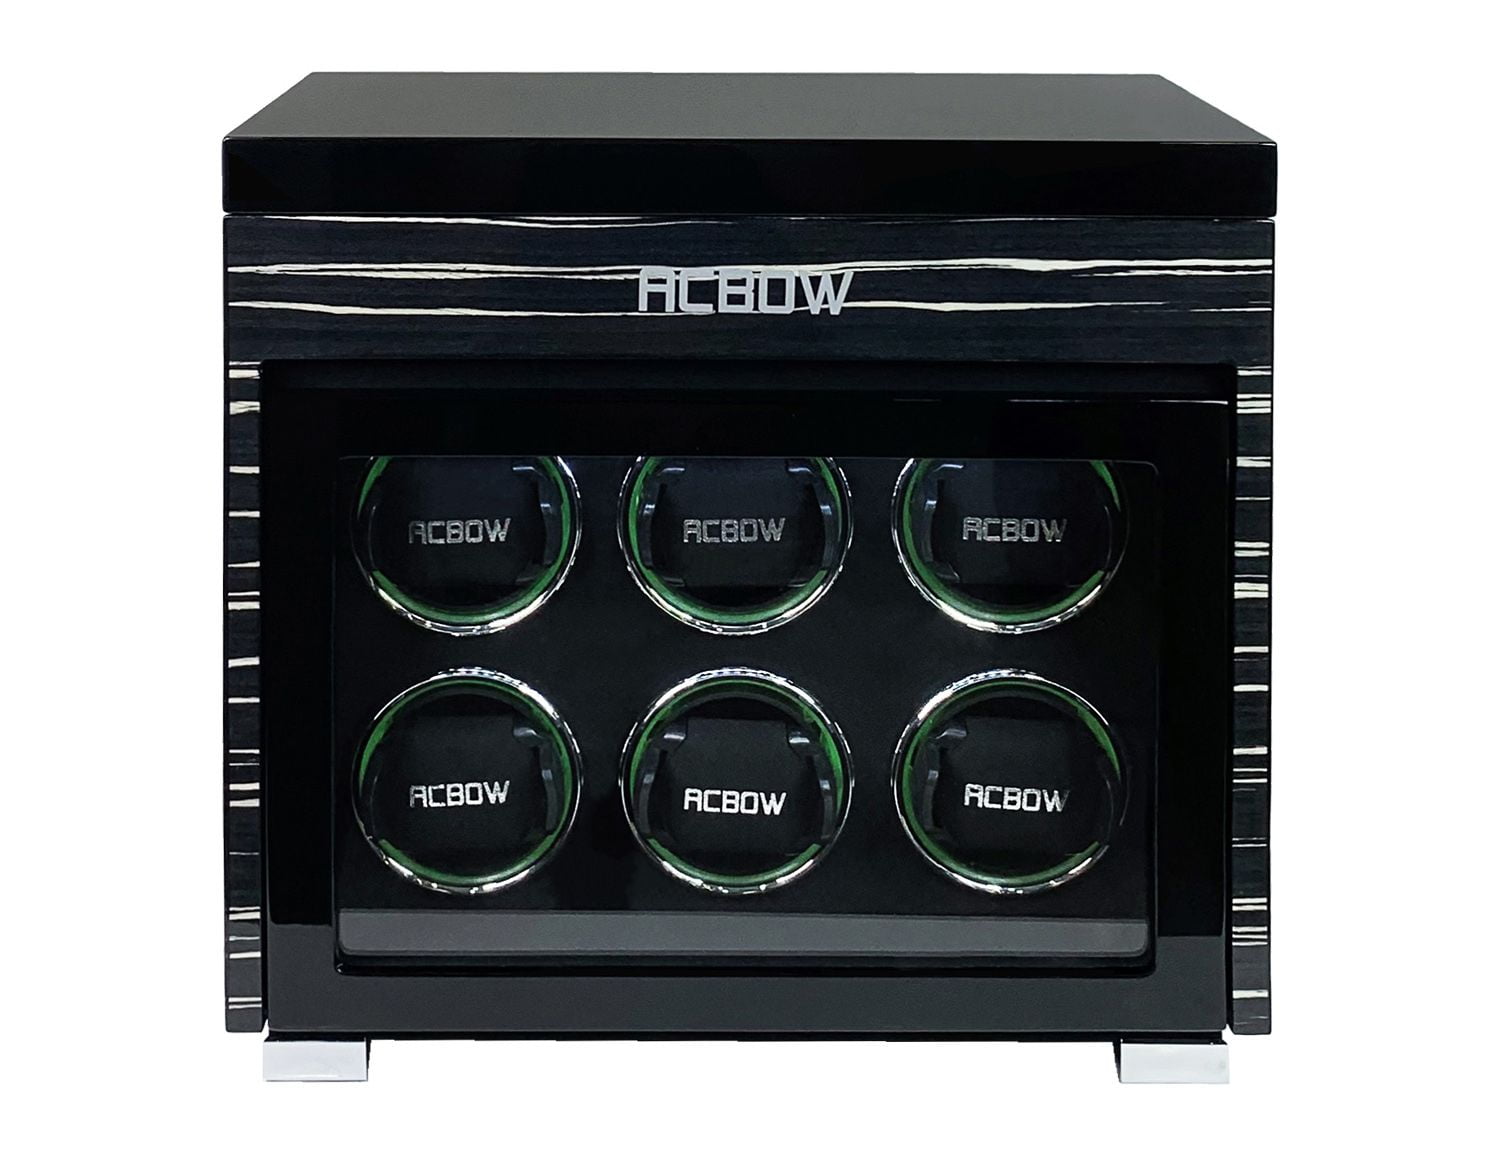 Tủ Đồng Hồ Cơ ACBOW IW0606 - (6 Xoay + 6 Tĩnh)